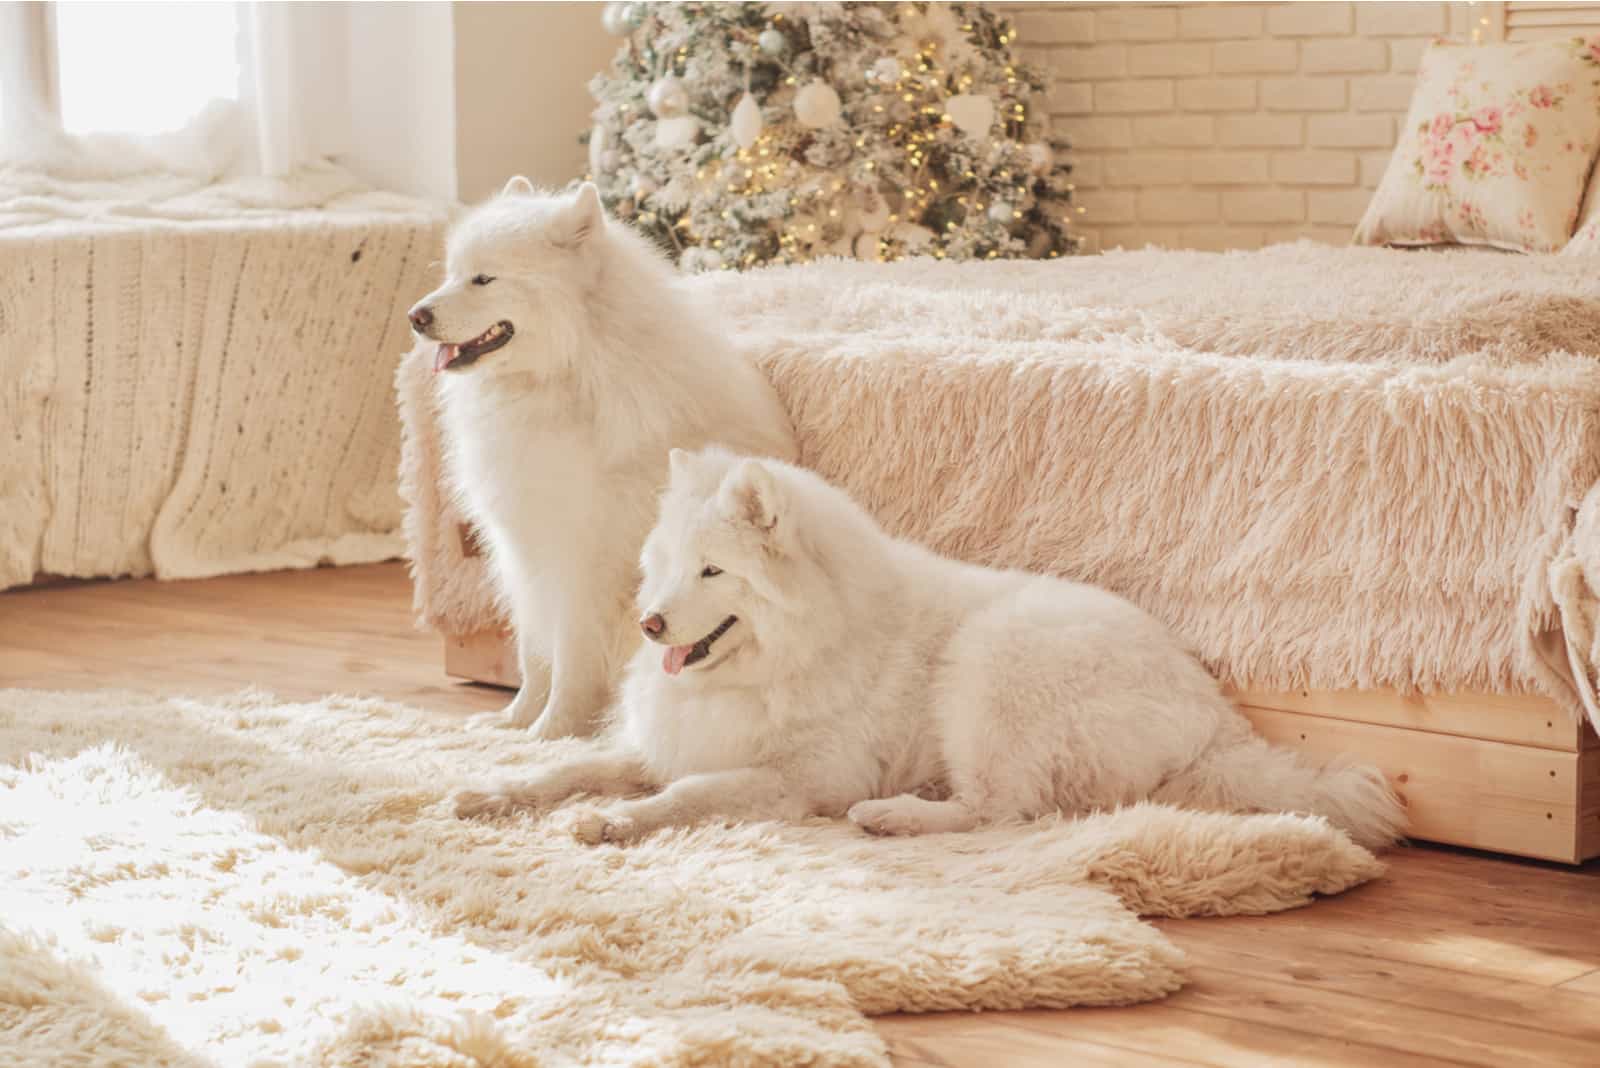 Two white Samoyed dogs are sitting on a fluffy carpet